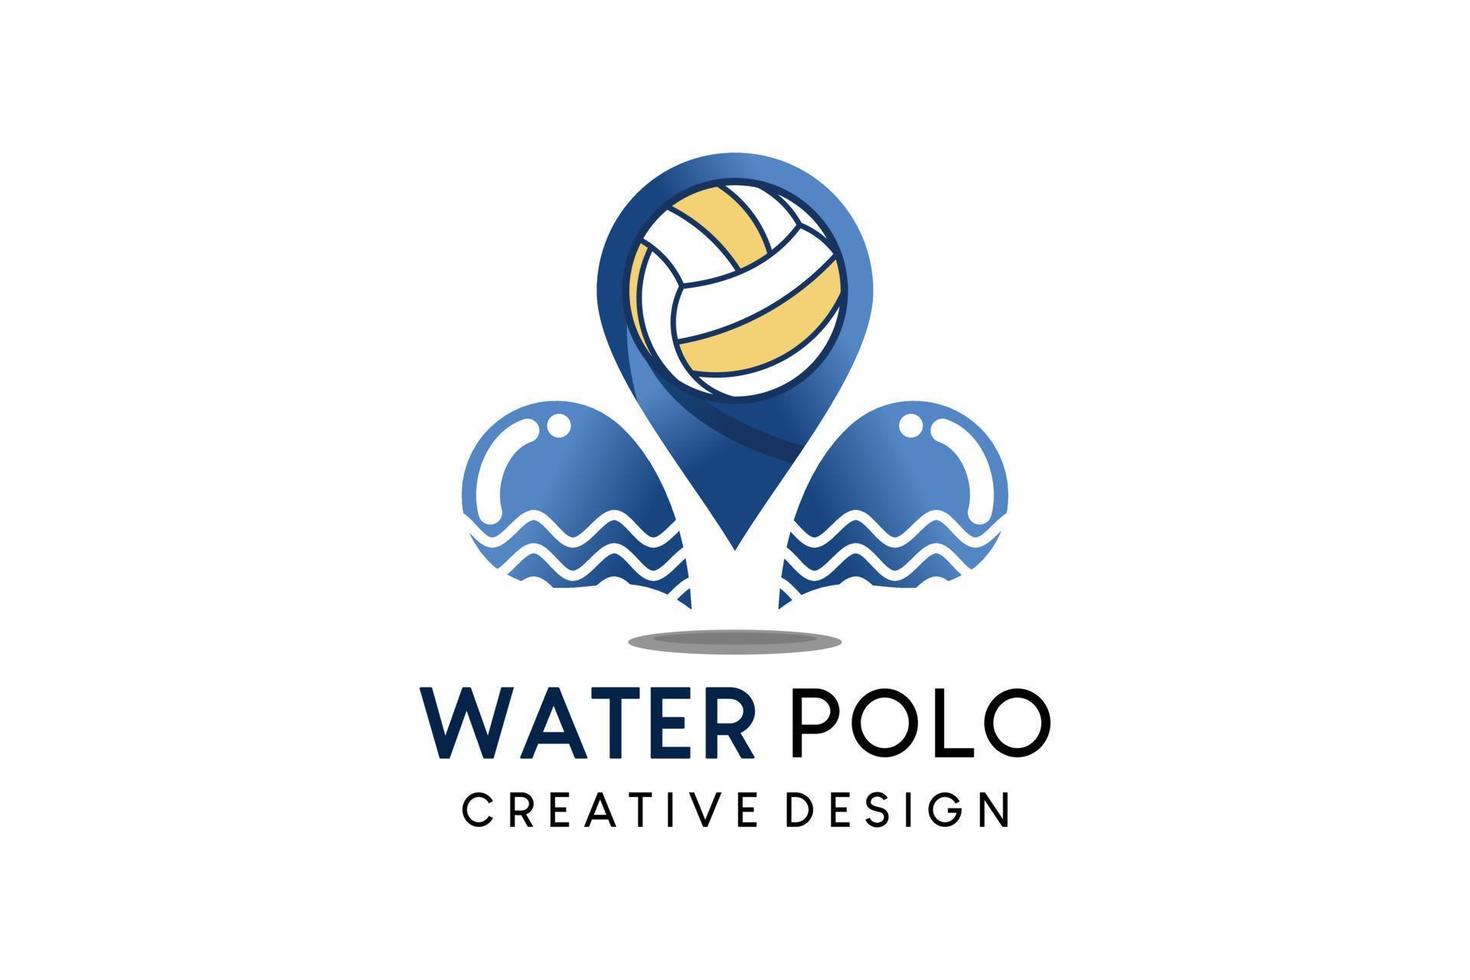 Water polo logo design, ball vector illustration with water drop icon